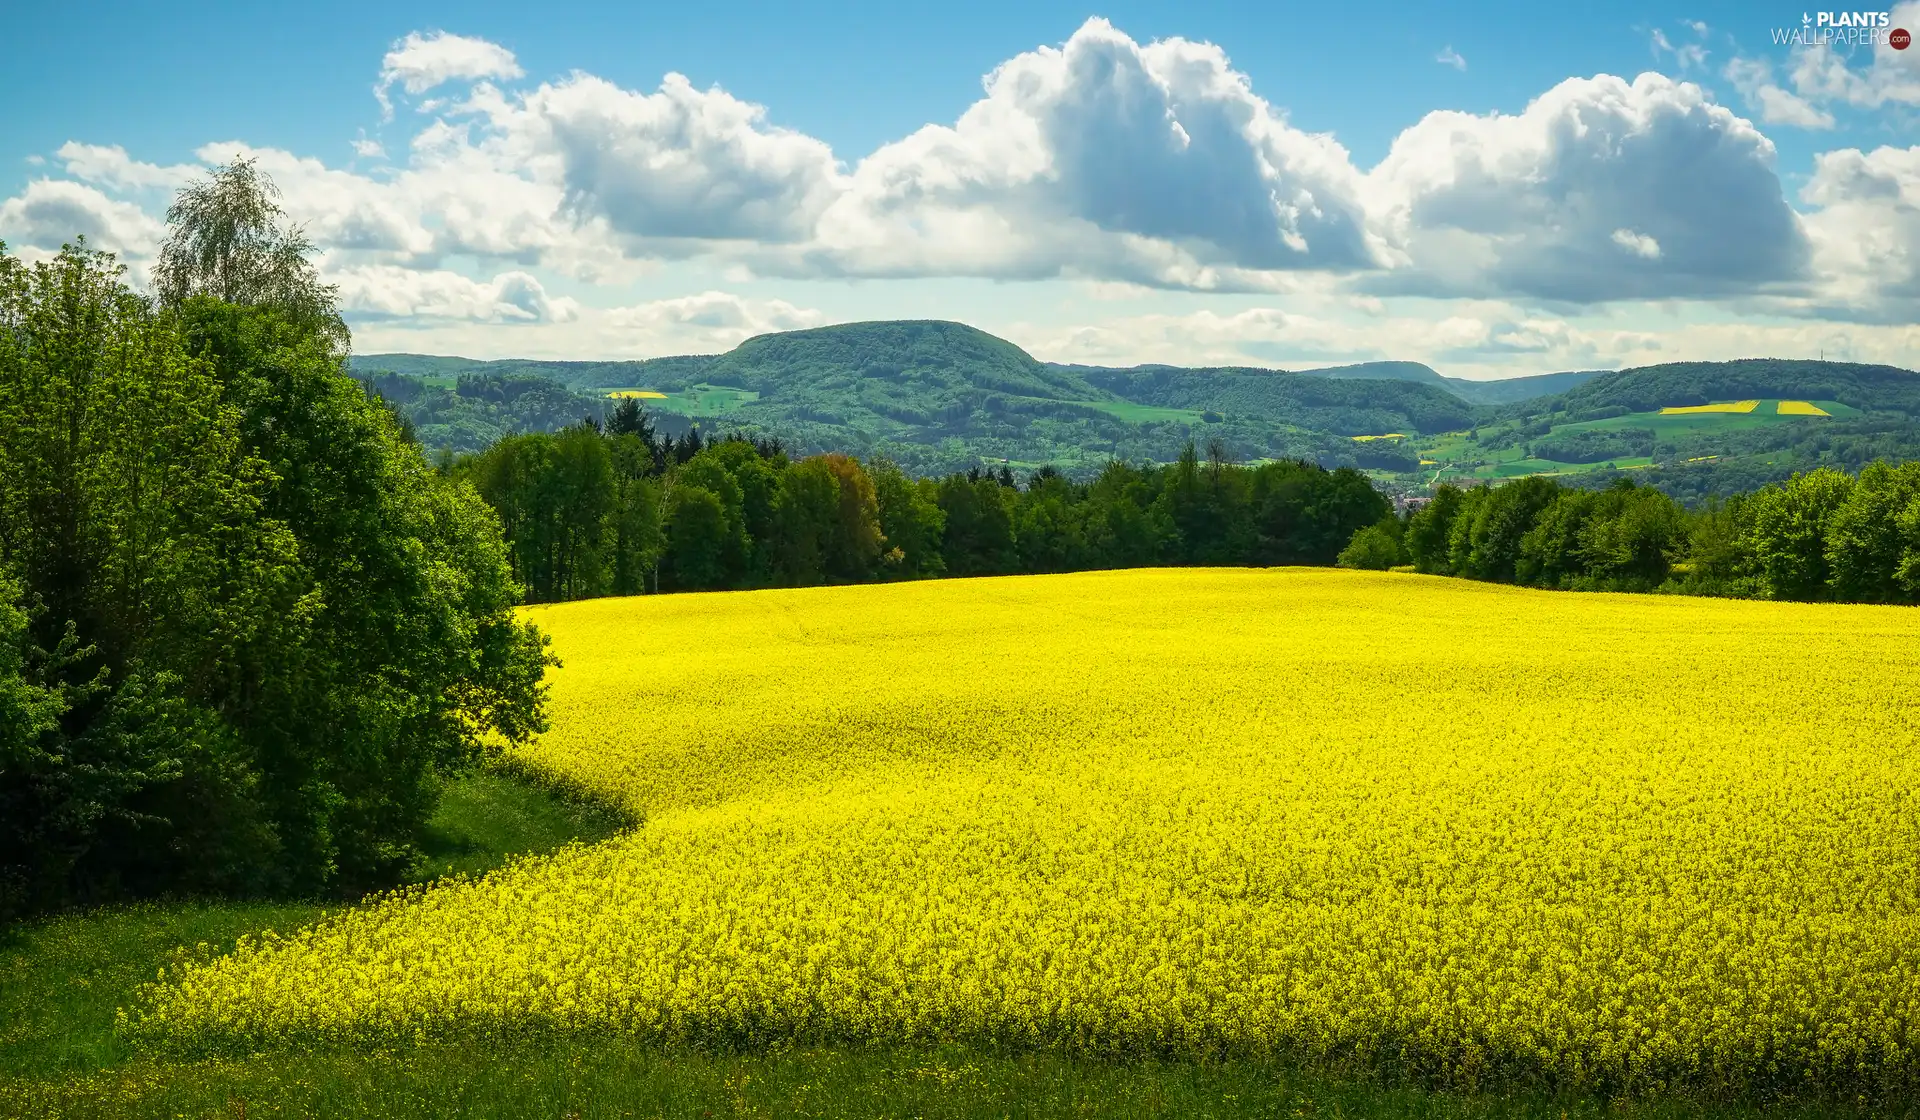 The Hills, Yellow, clouds, Flowers, viewes, rape, Field, trees